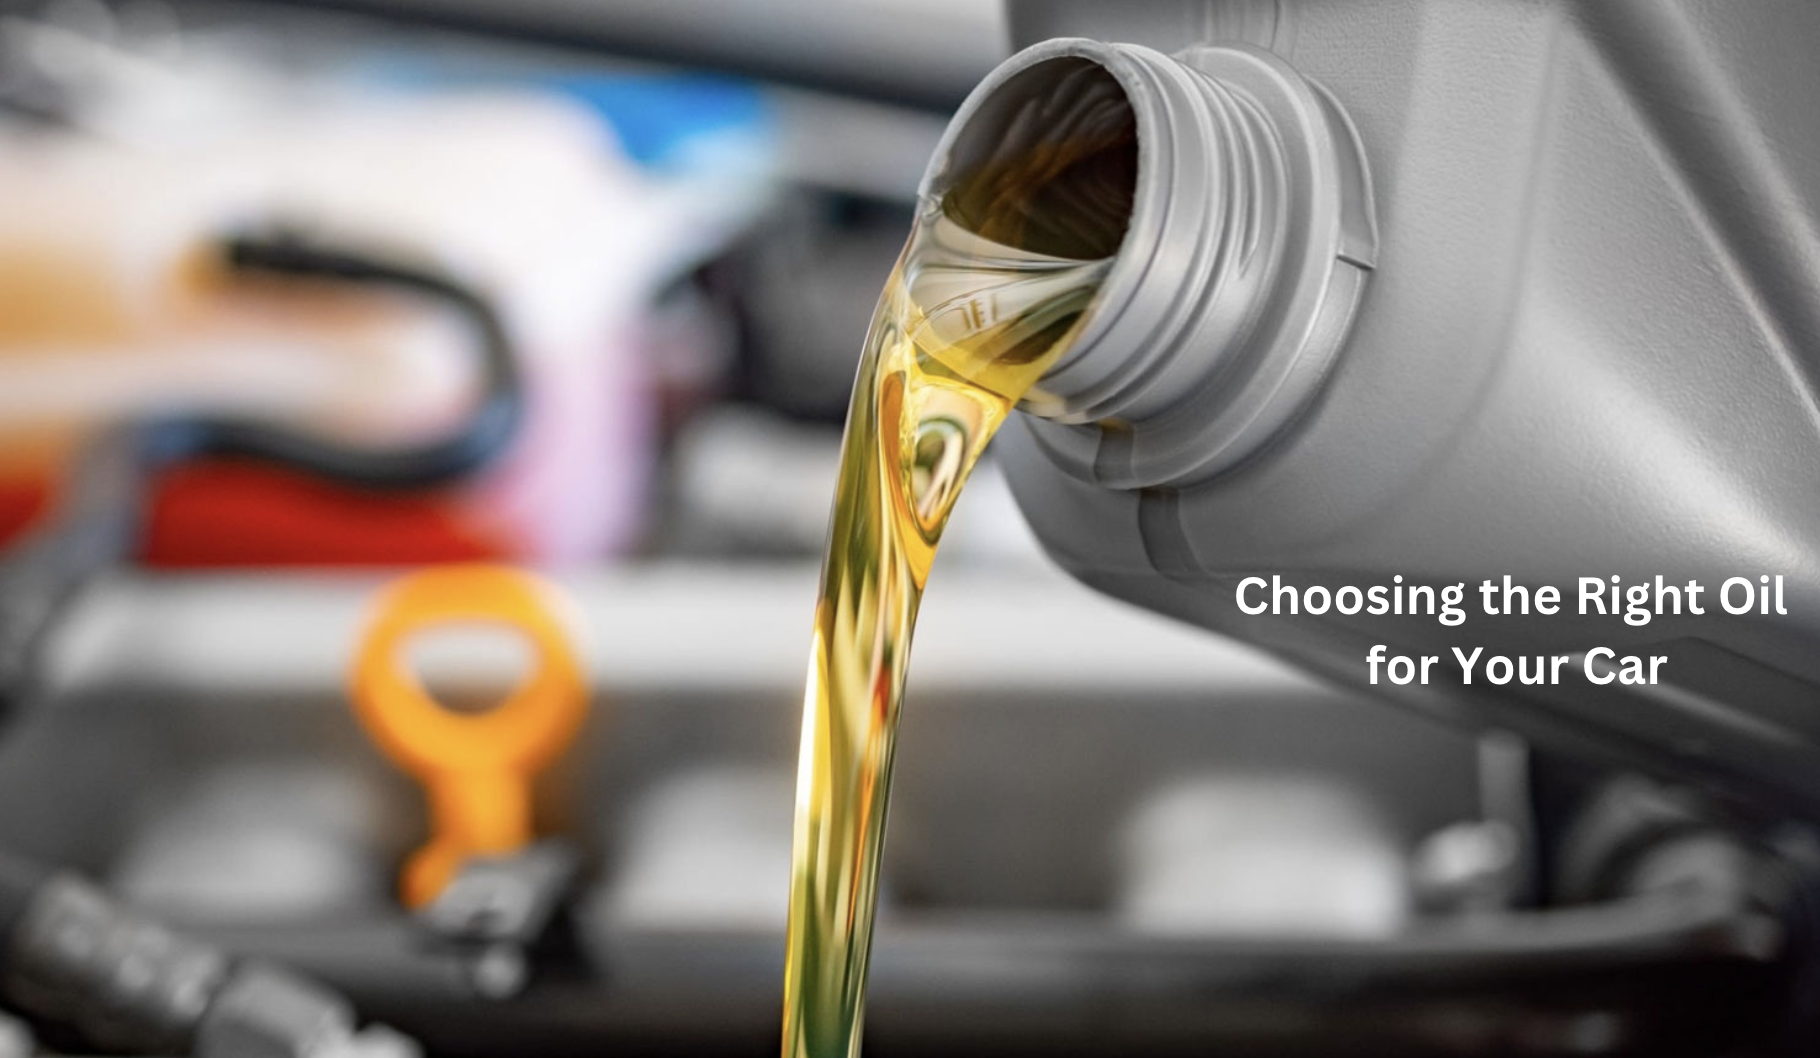 Choosing the Right Oil for Your Car